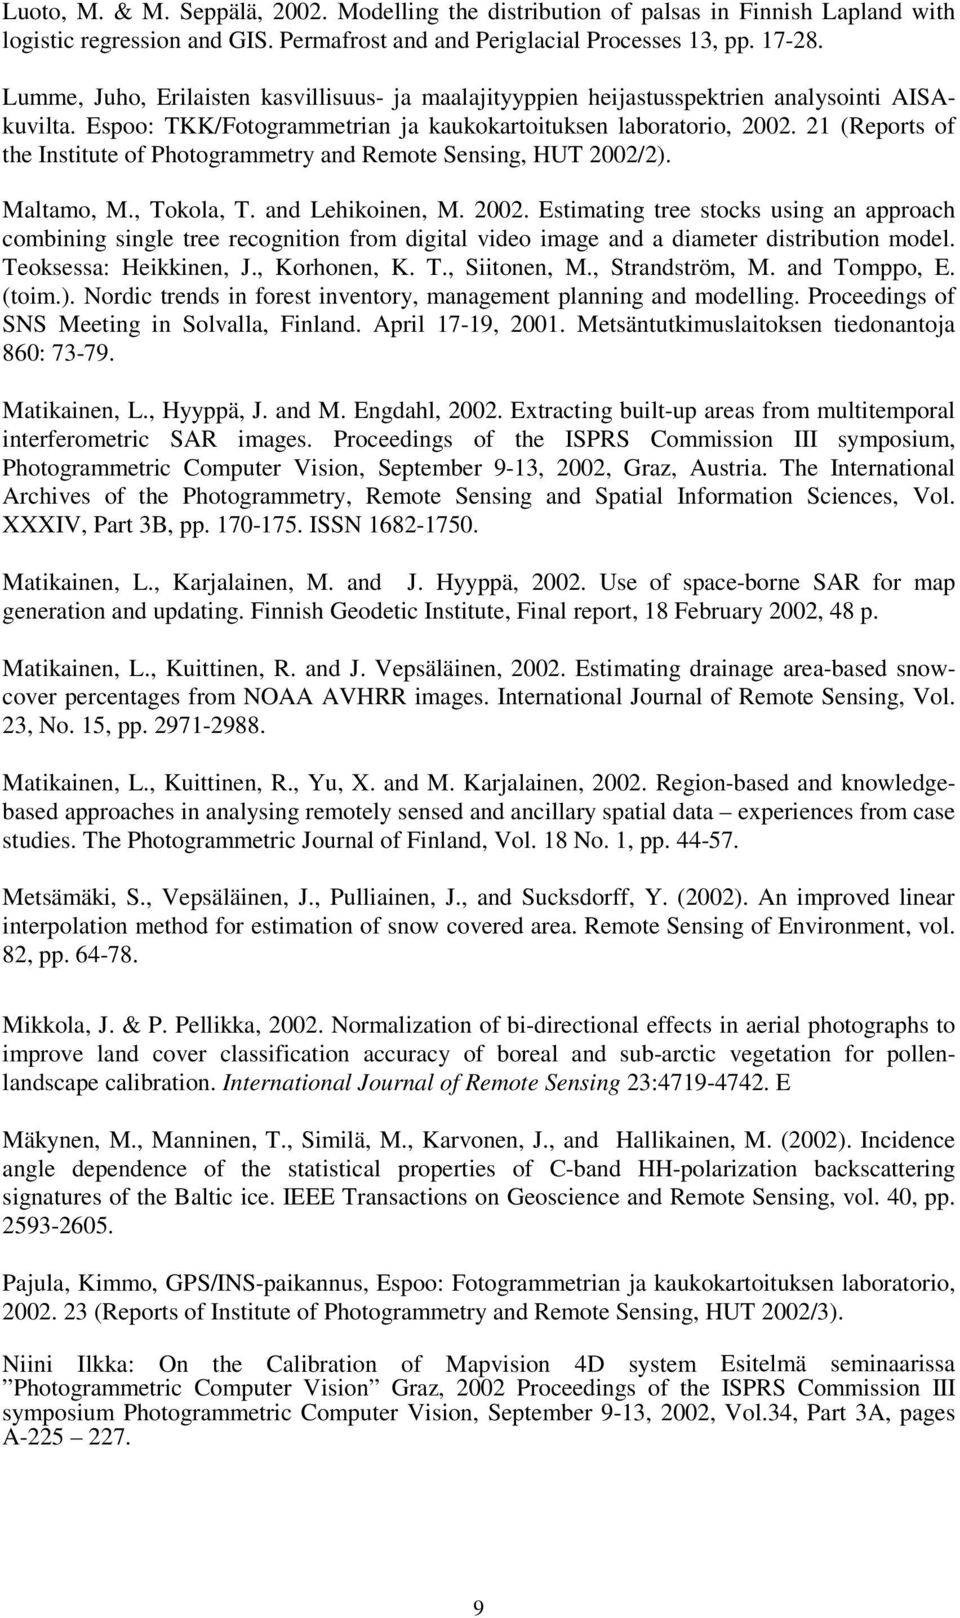 21 (Reports of the Institute of Photogrammetry and Remote Sensing, HUT 2002/